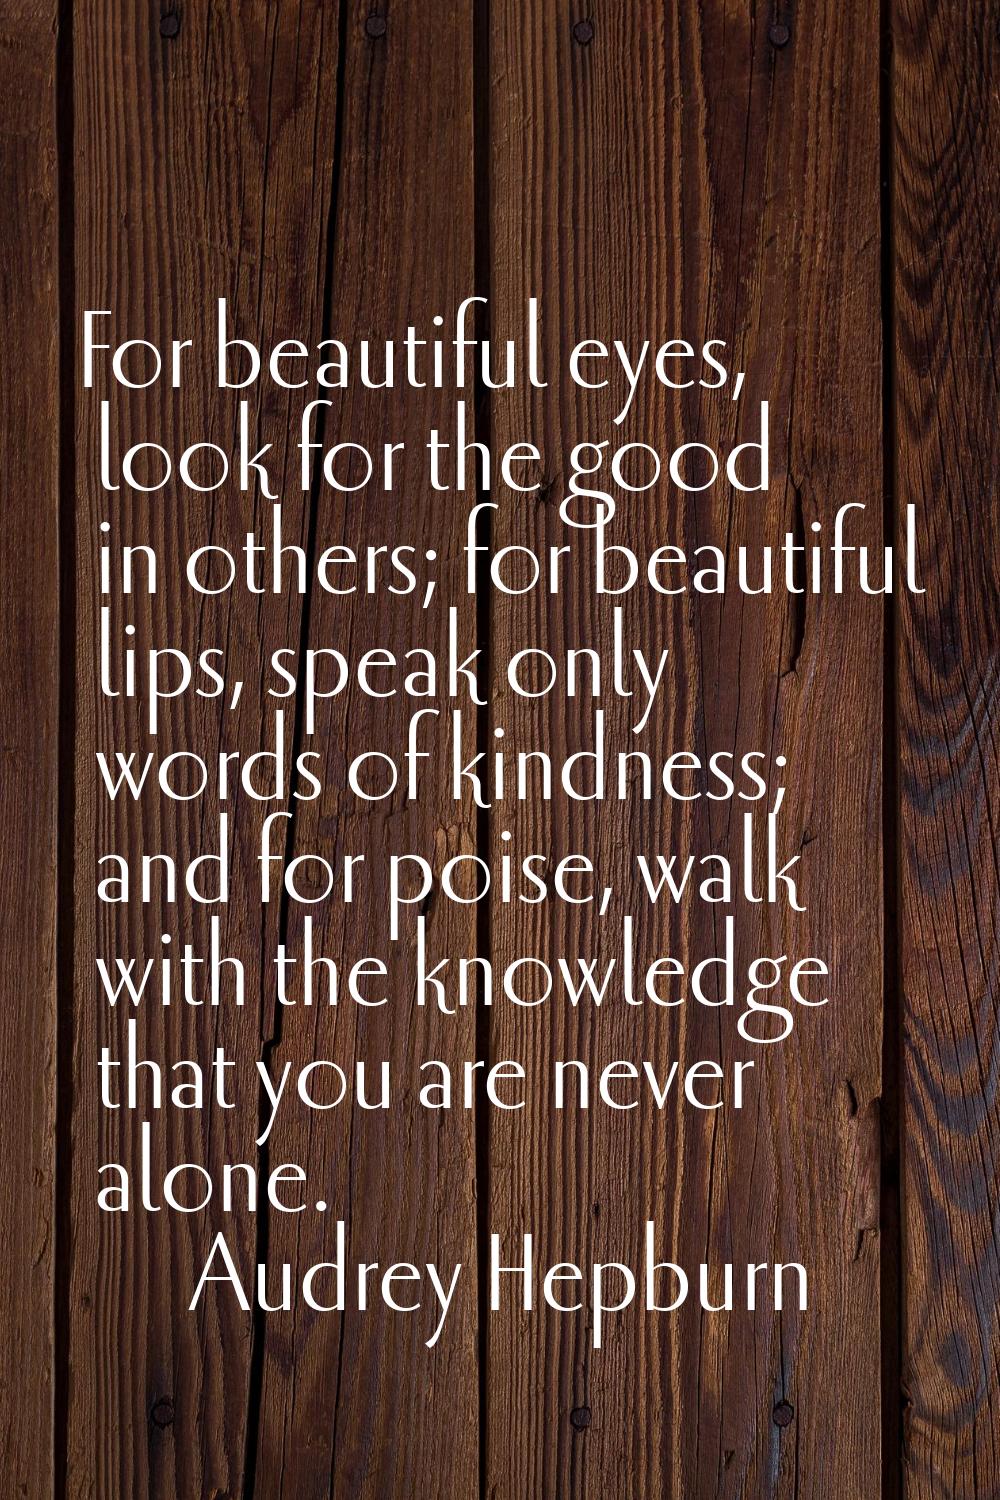 For beautiful eyes, look for the good in others; for beautiful lips, speak only words of kindness; 